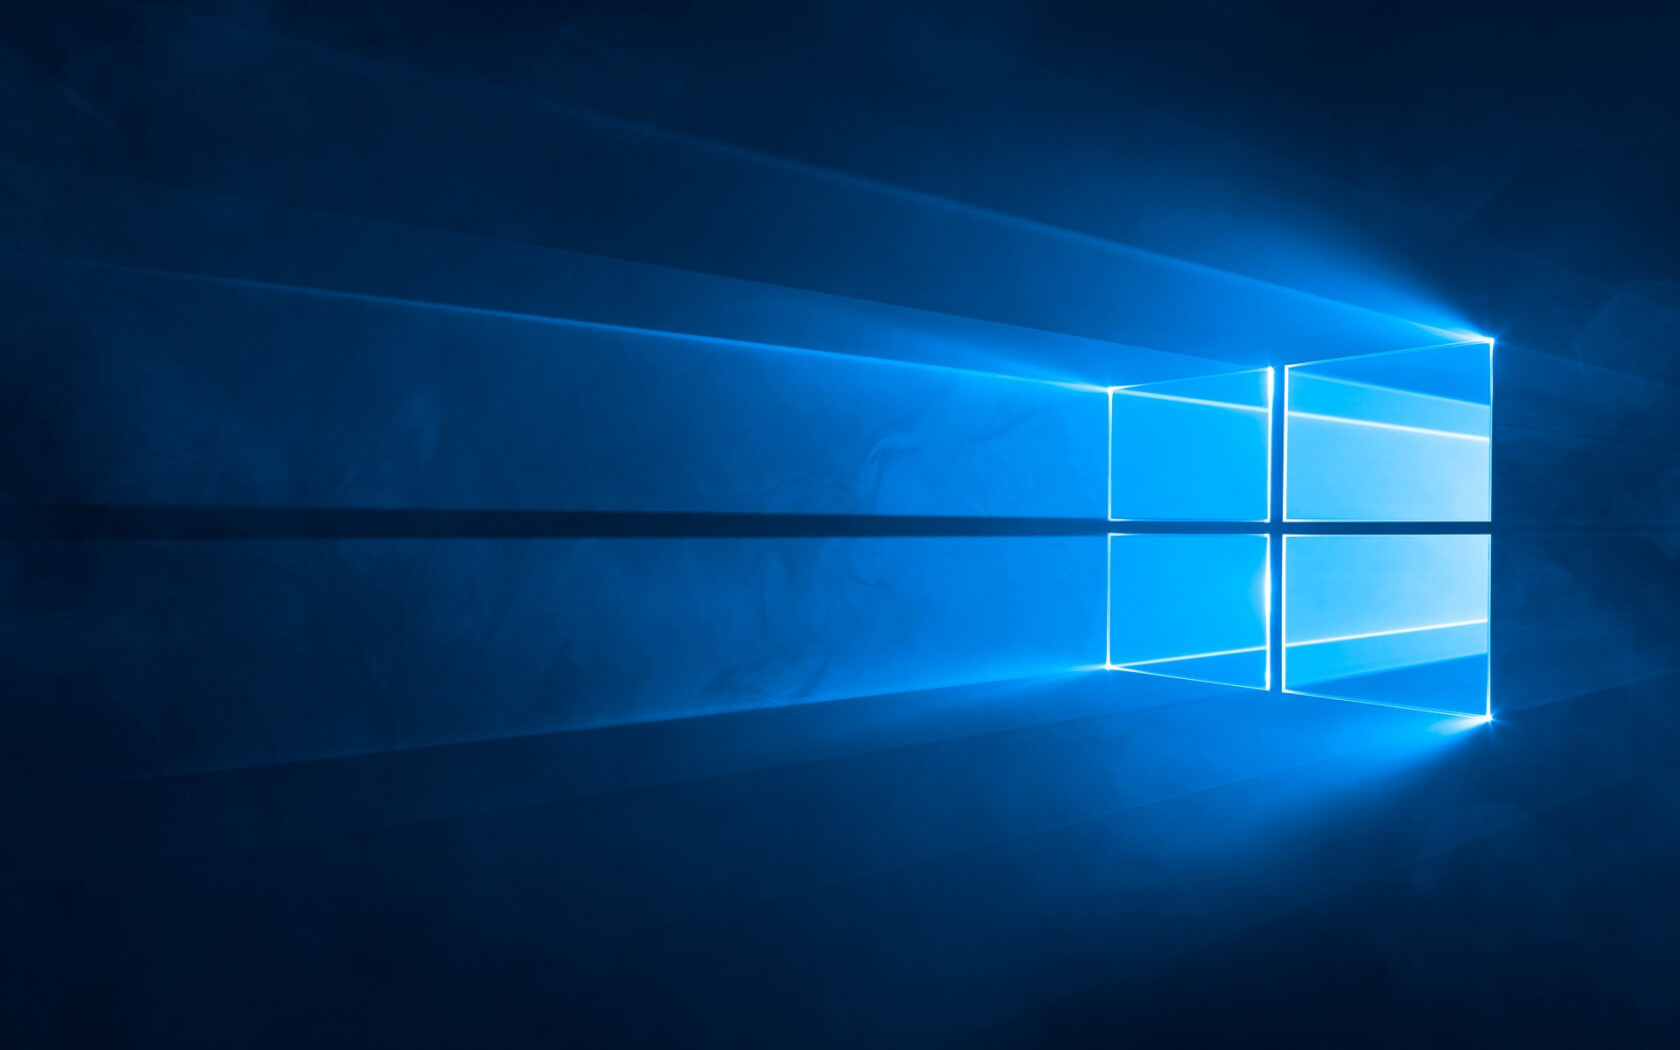 Microsoft says 71% of Windows 10 users allow their data to be collected